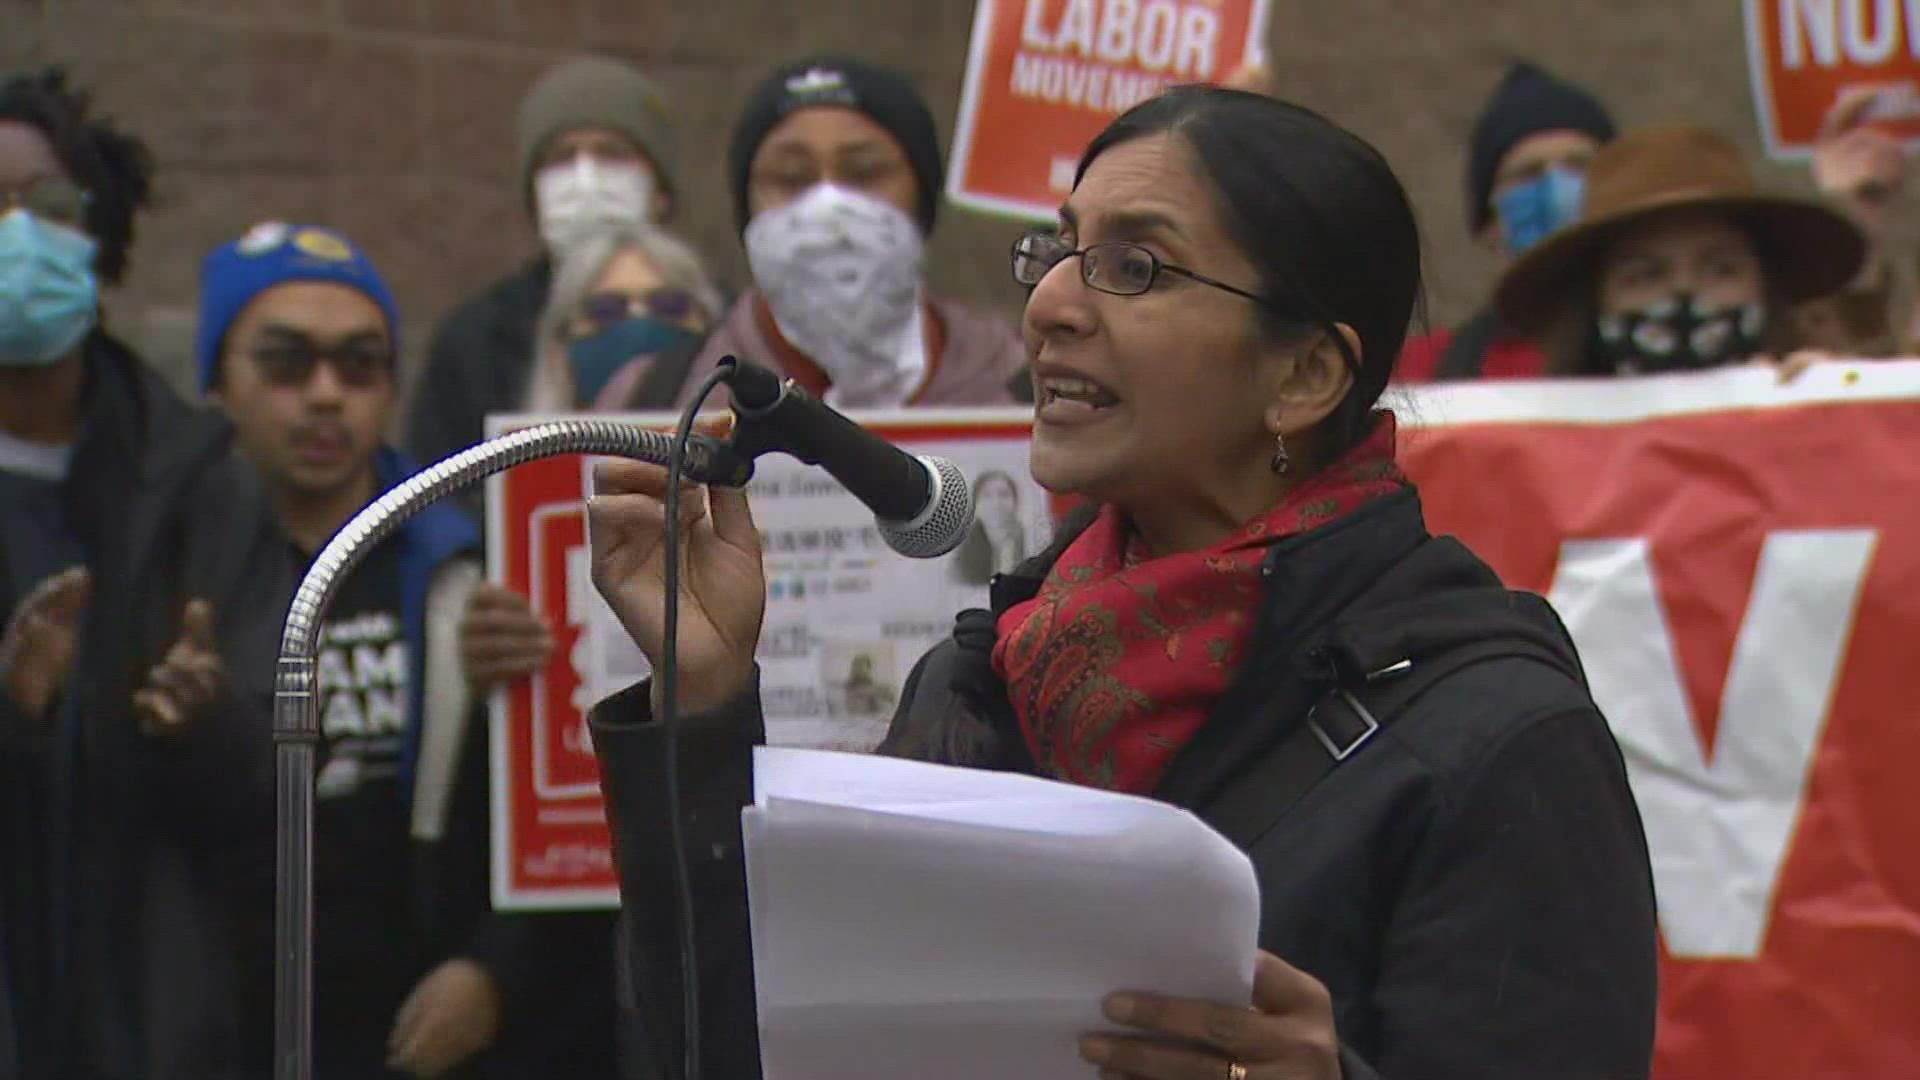 Seattle City Councilmember Kshama Sawant declared an early victory Friday in the recall election against her.